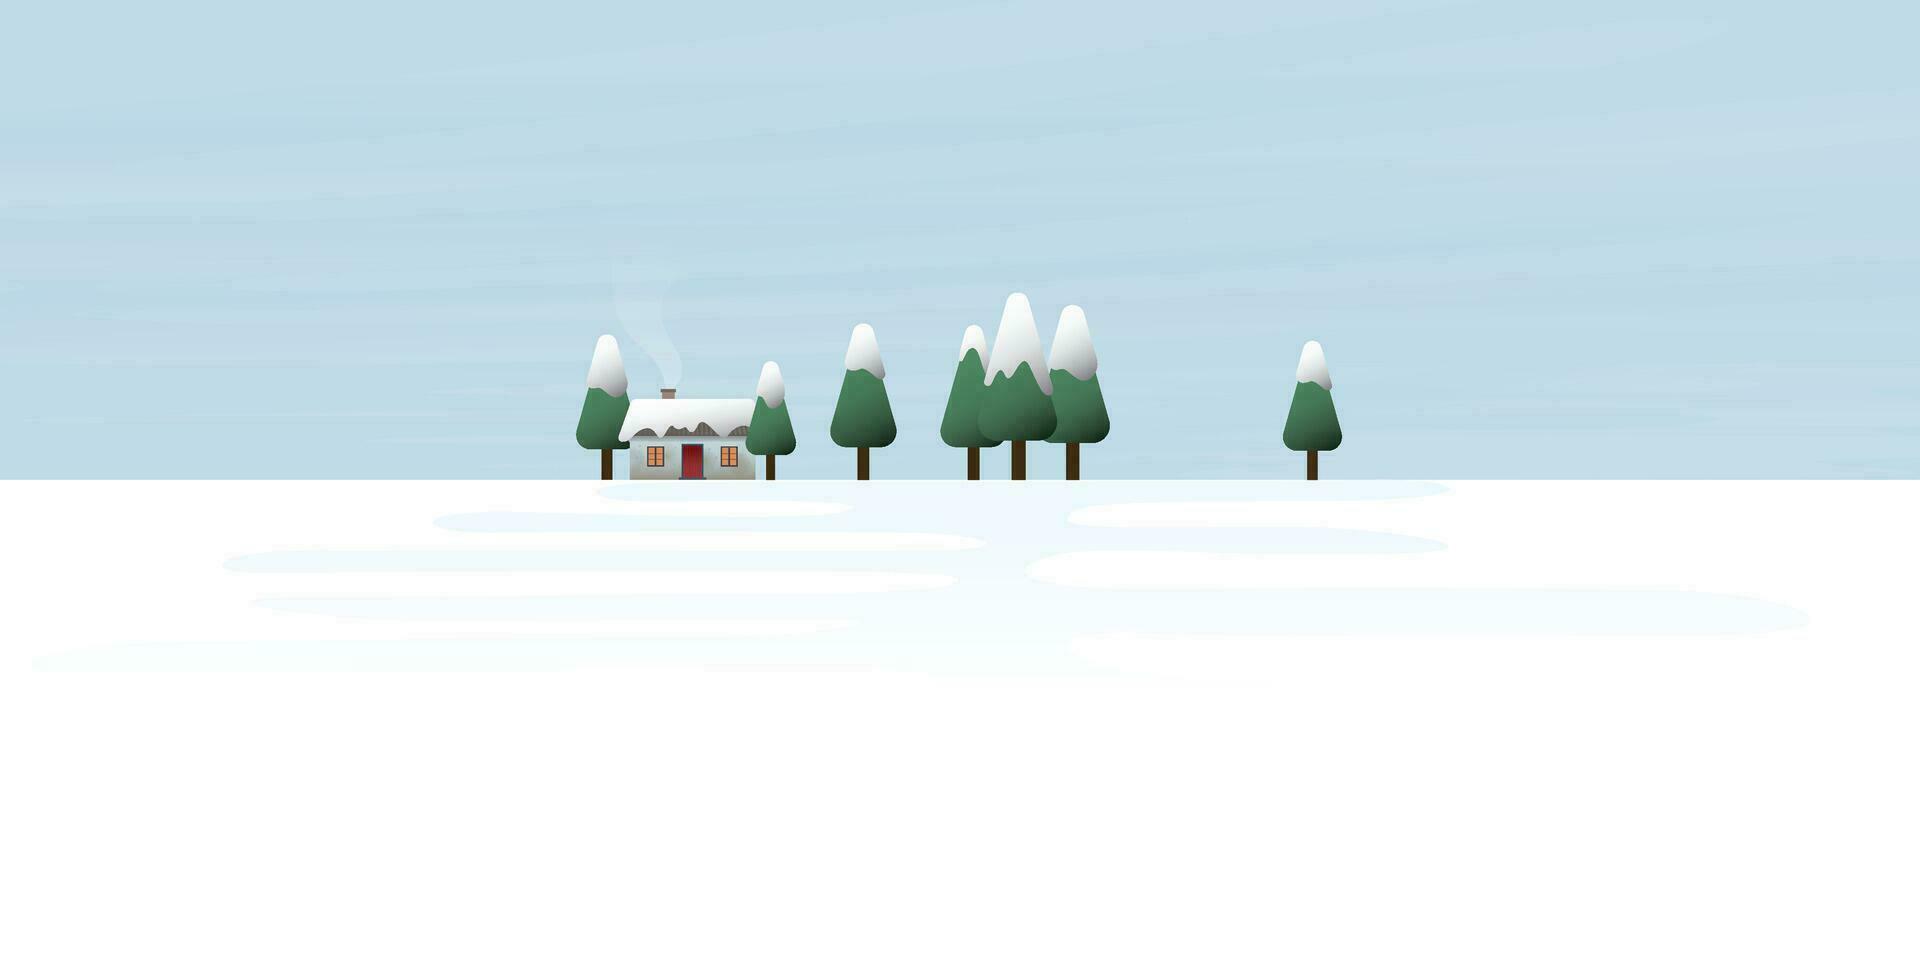 Log cabin with pines forest in snowland flat design vector illustration with blank space. Rural landscape, house and pine trees in winter season.